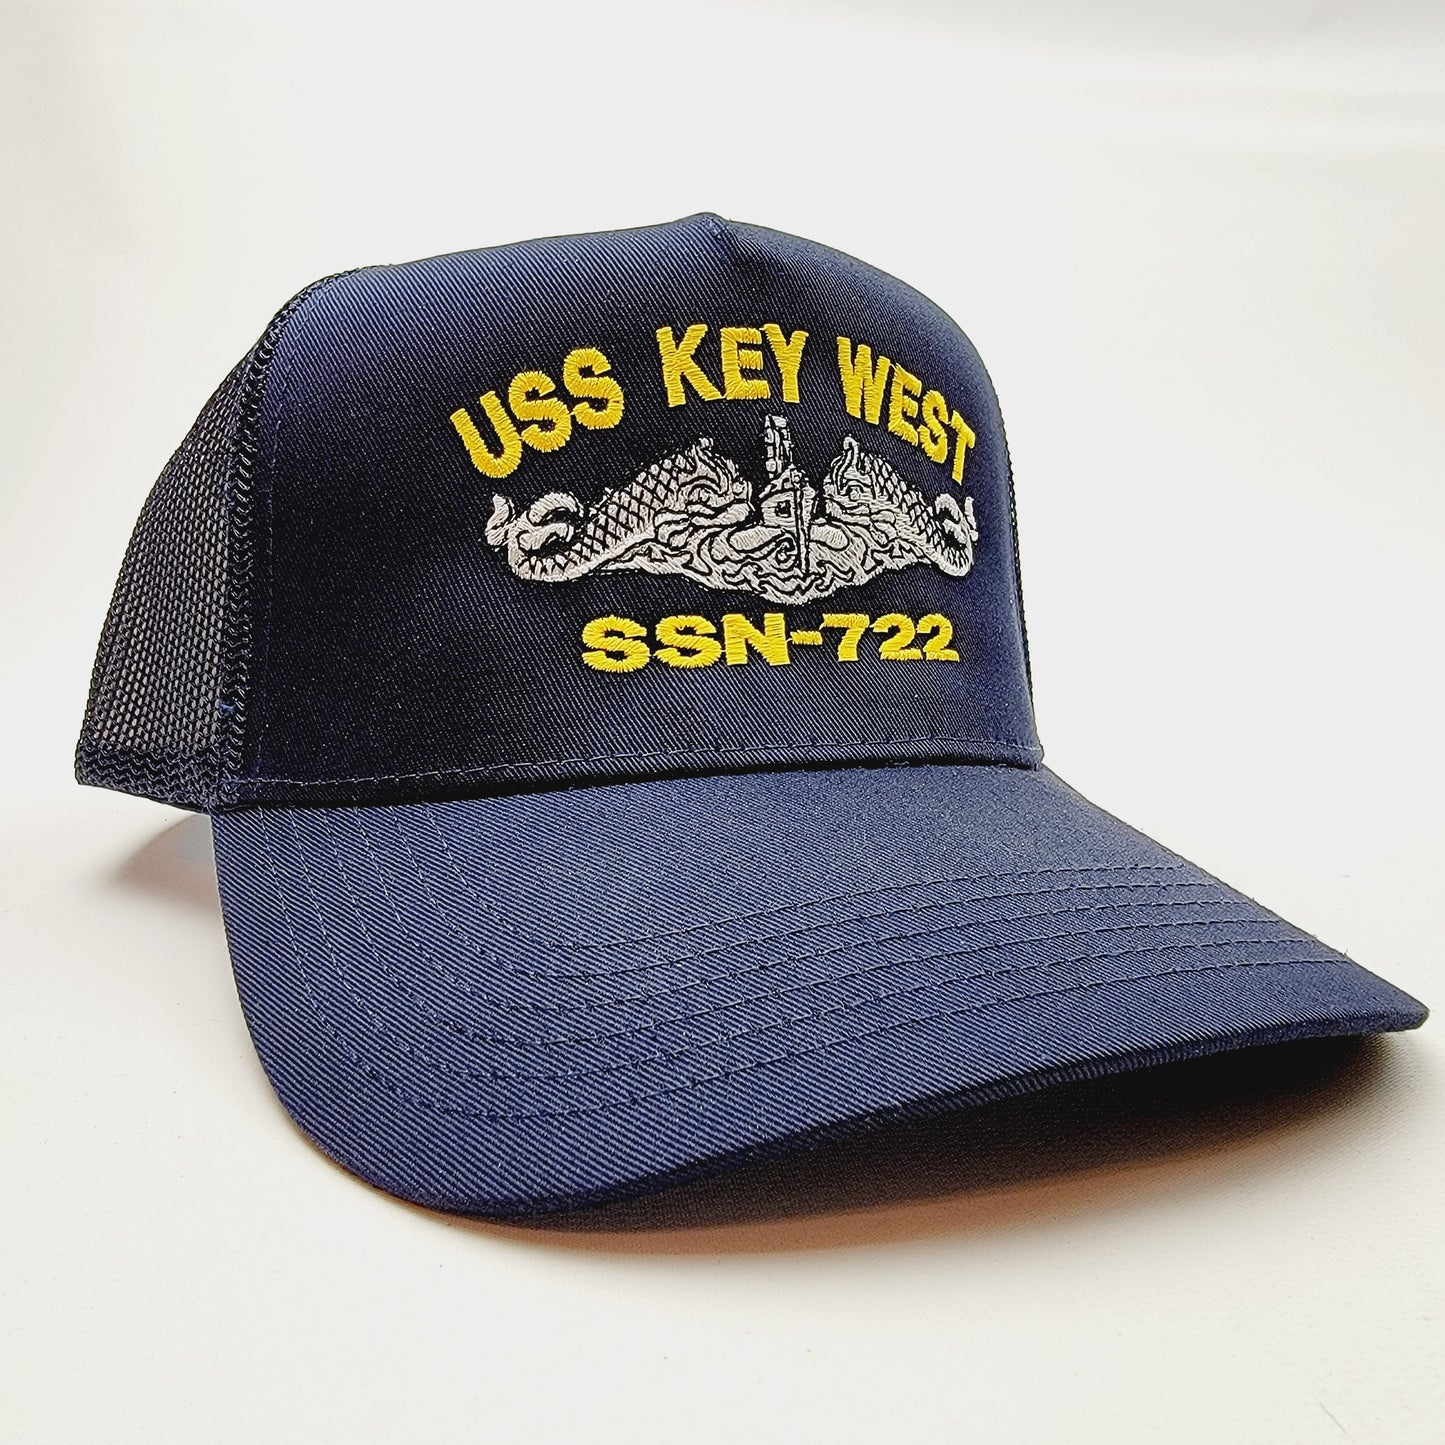 US NAVY USS KEY WEST SSN-722 Embroidered Hat Baseball Cap Adjustable Blue